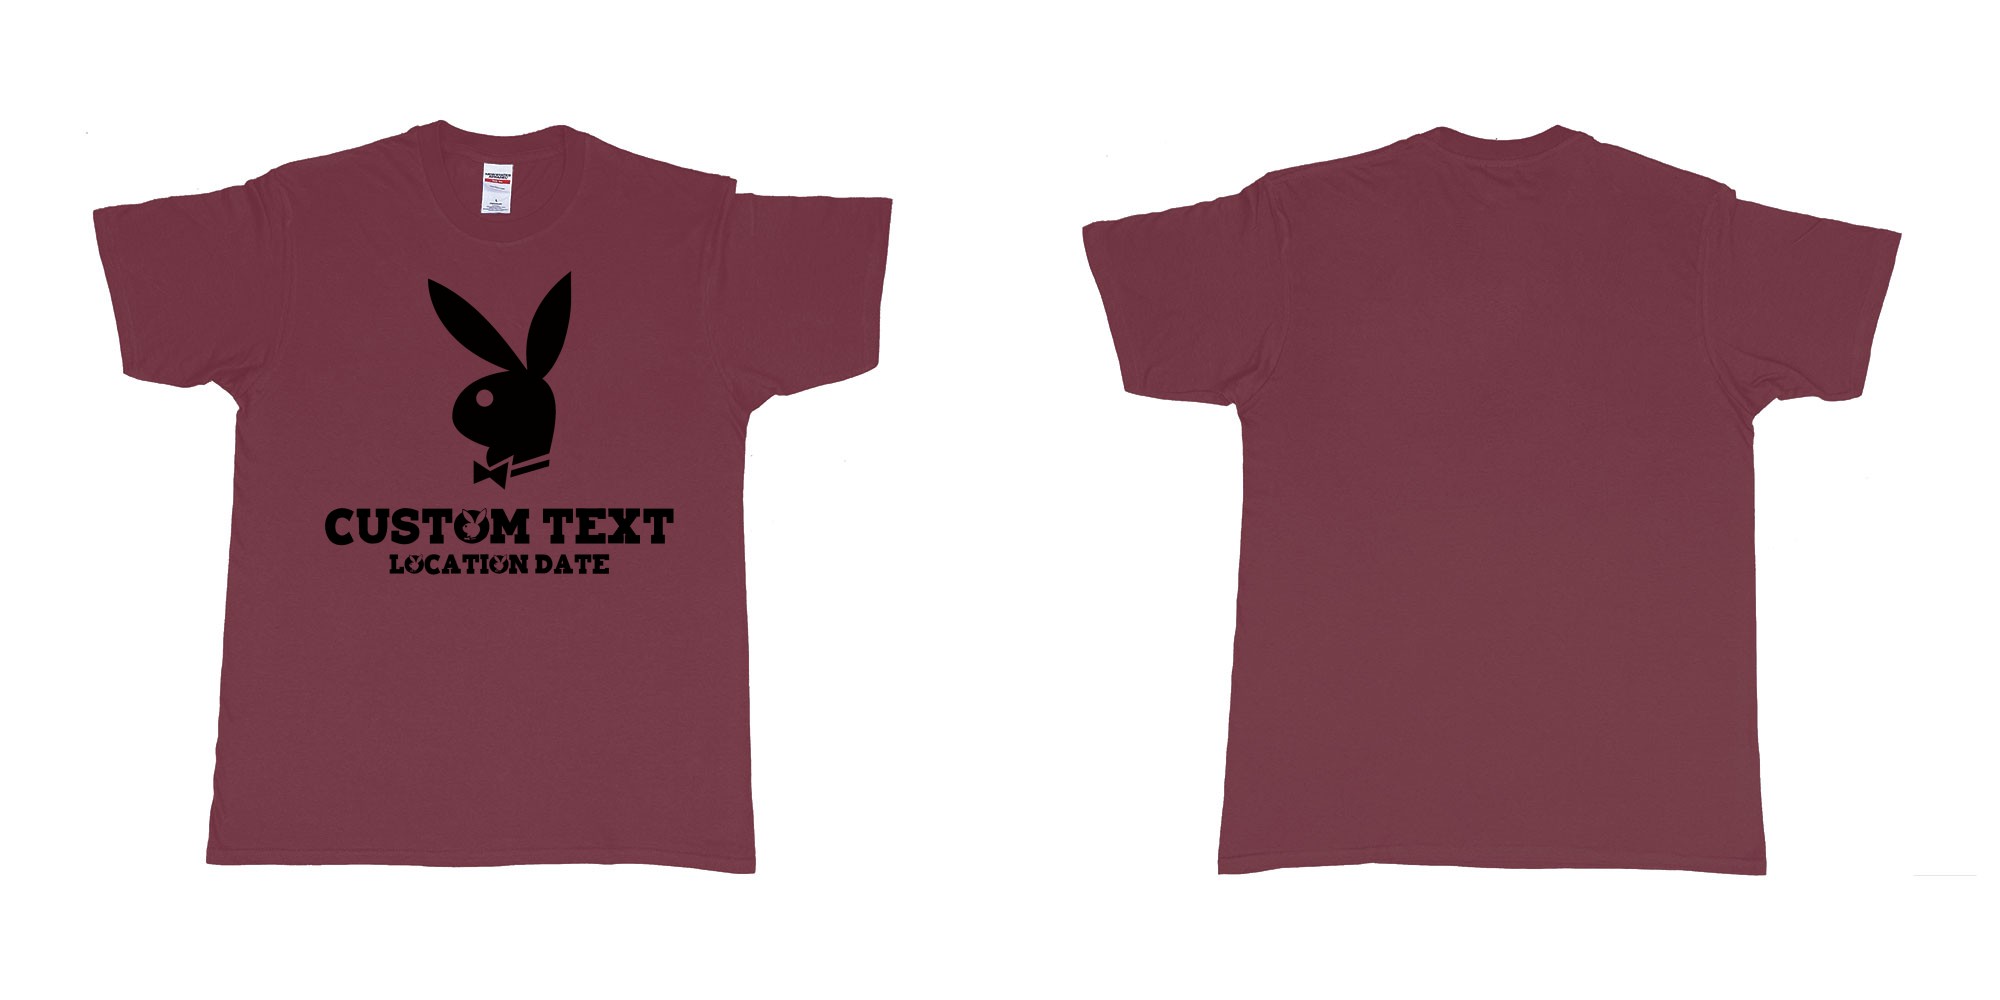 Custom tshirt design playboy playgirl custom text tshirt in fabric color marron choice your own text made in Bali by The Pirate Way